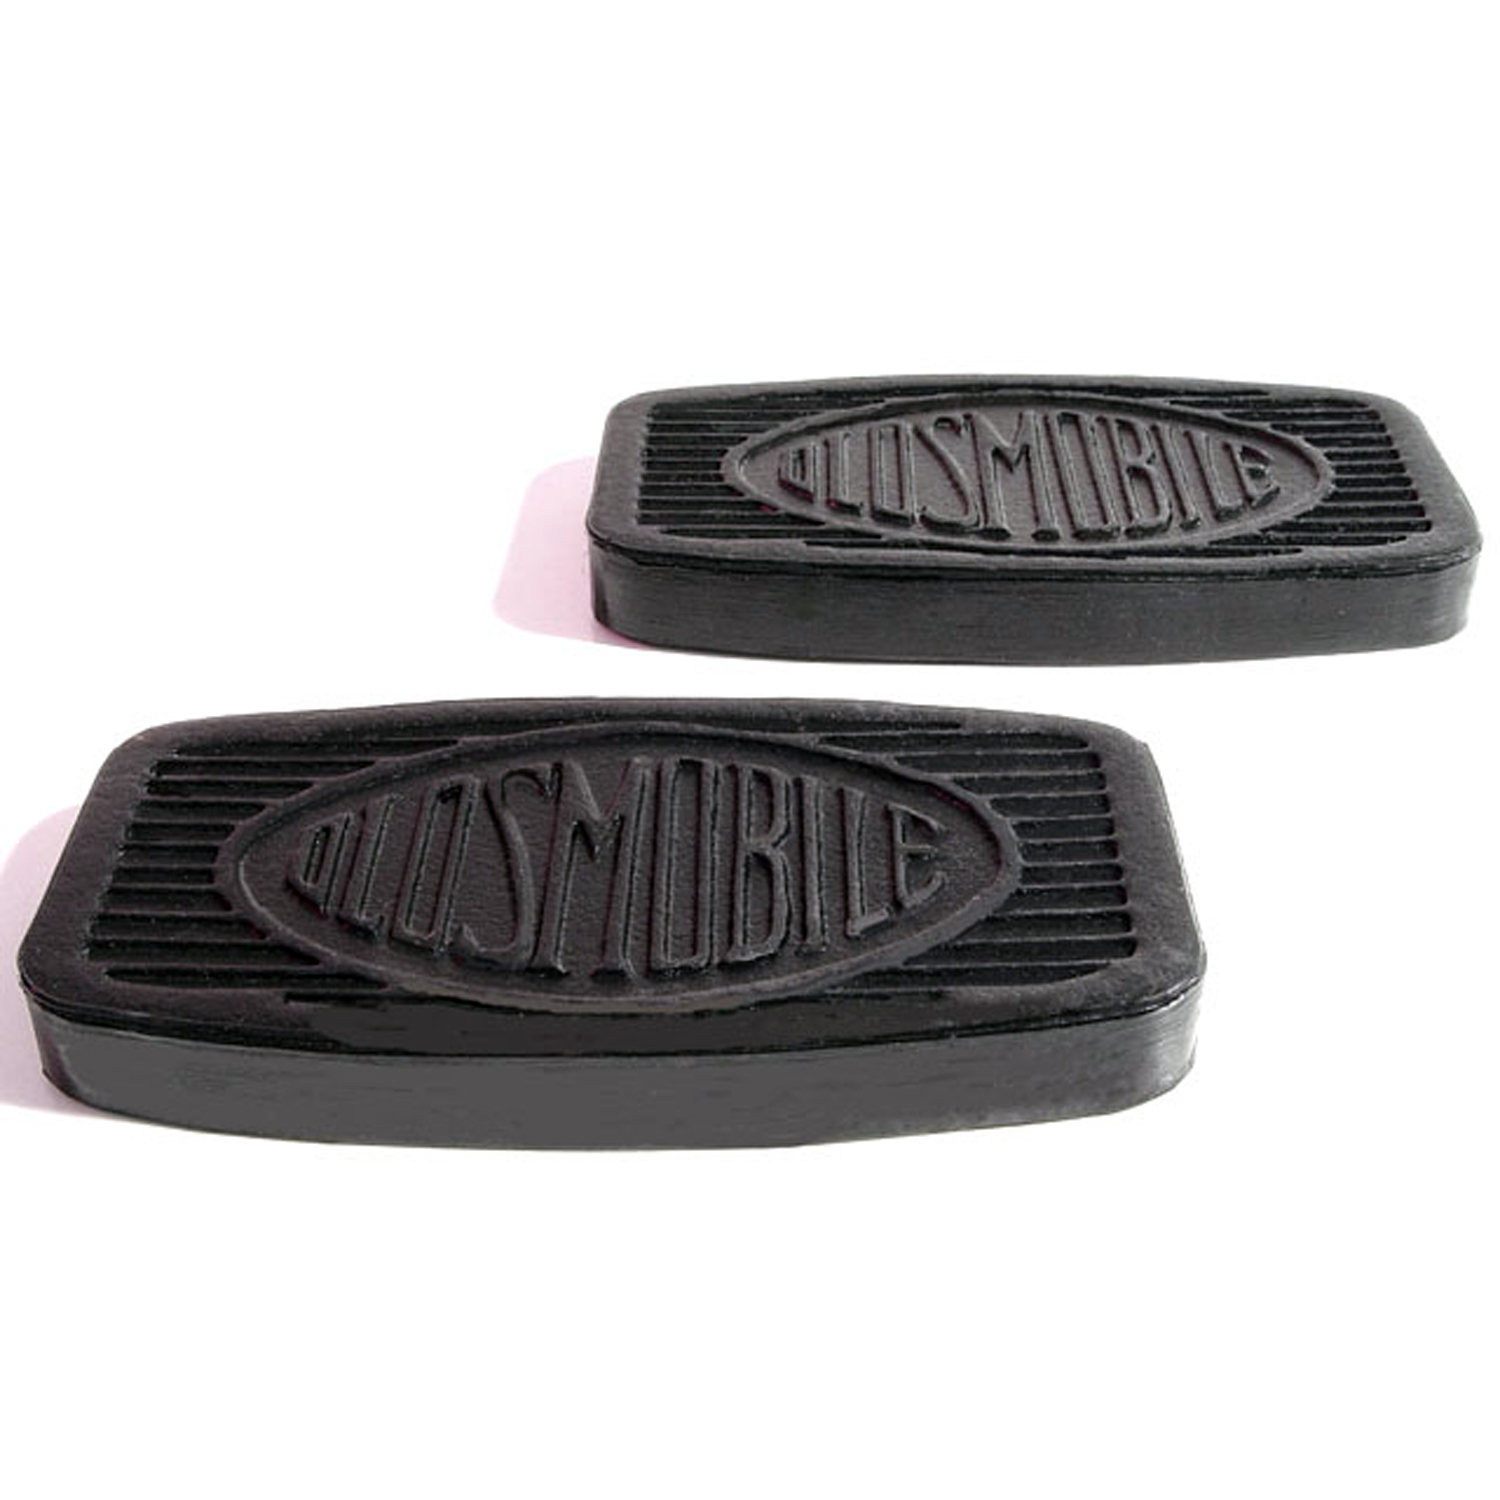 1928 Oldsmobile Model F-28 Clutch and Brake Pedal Pads.  3-1/2 wide X 1-3/16 long-CB 95